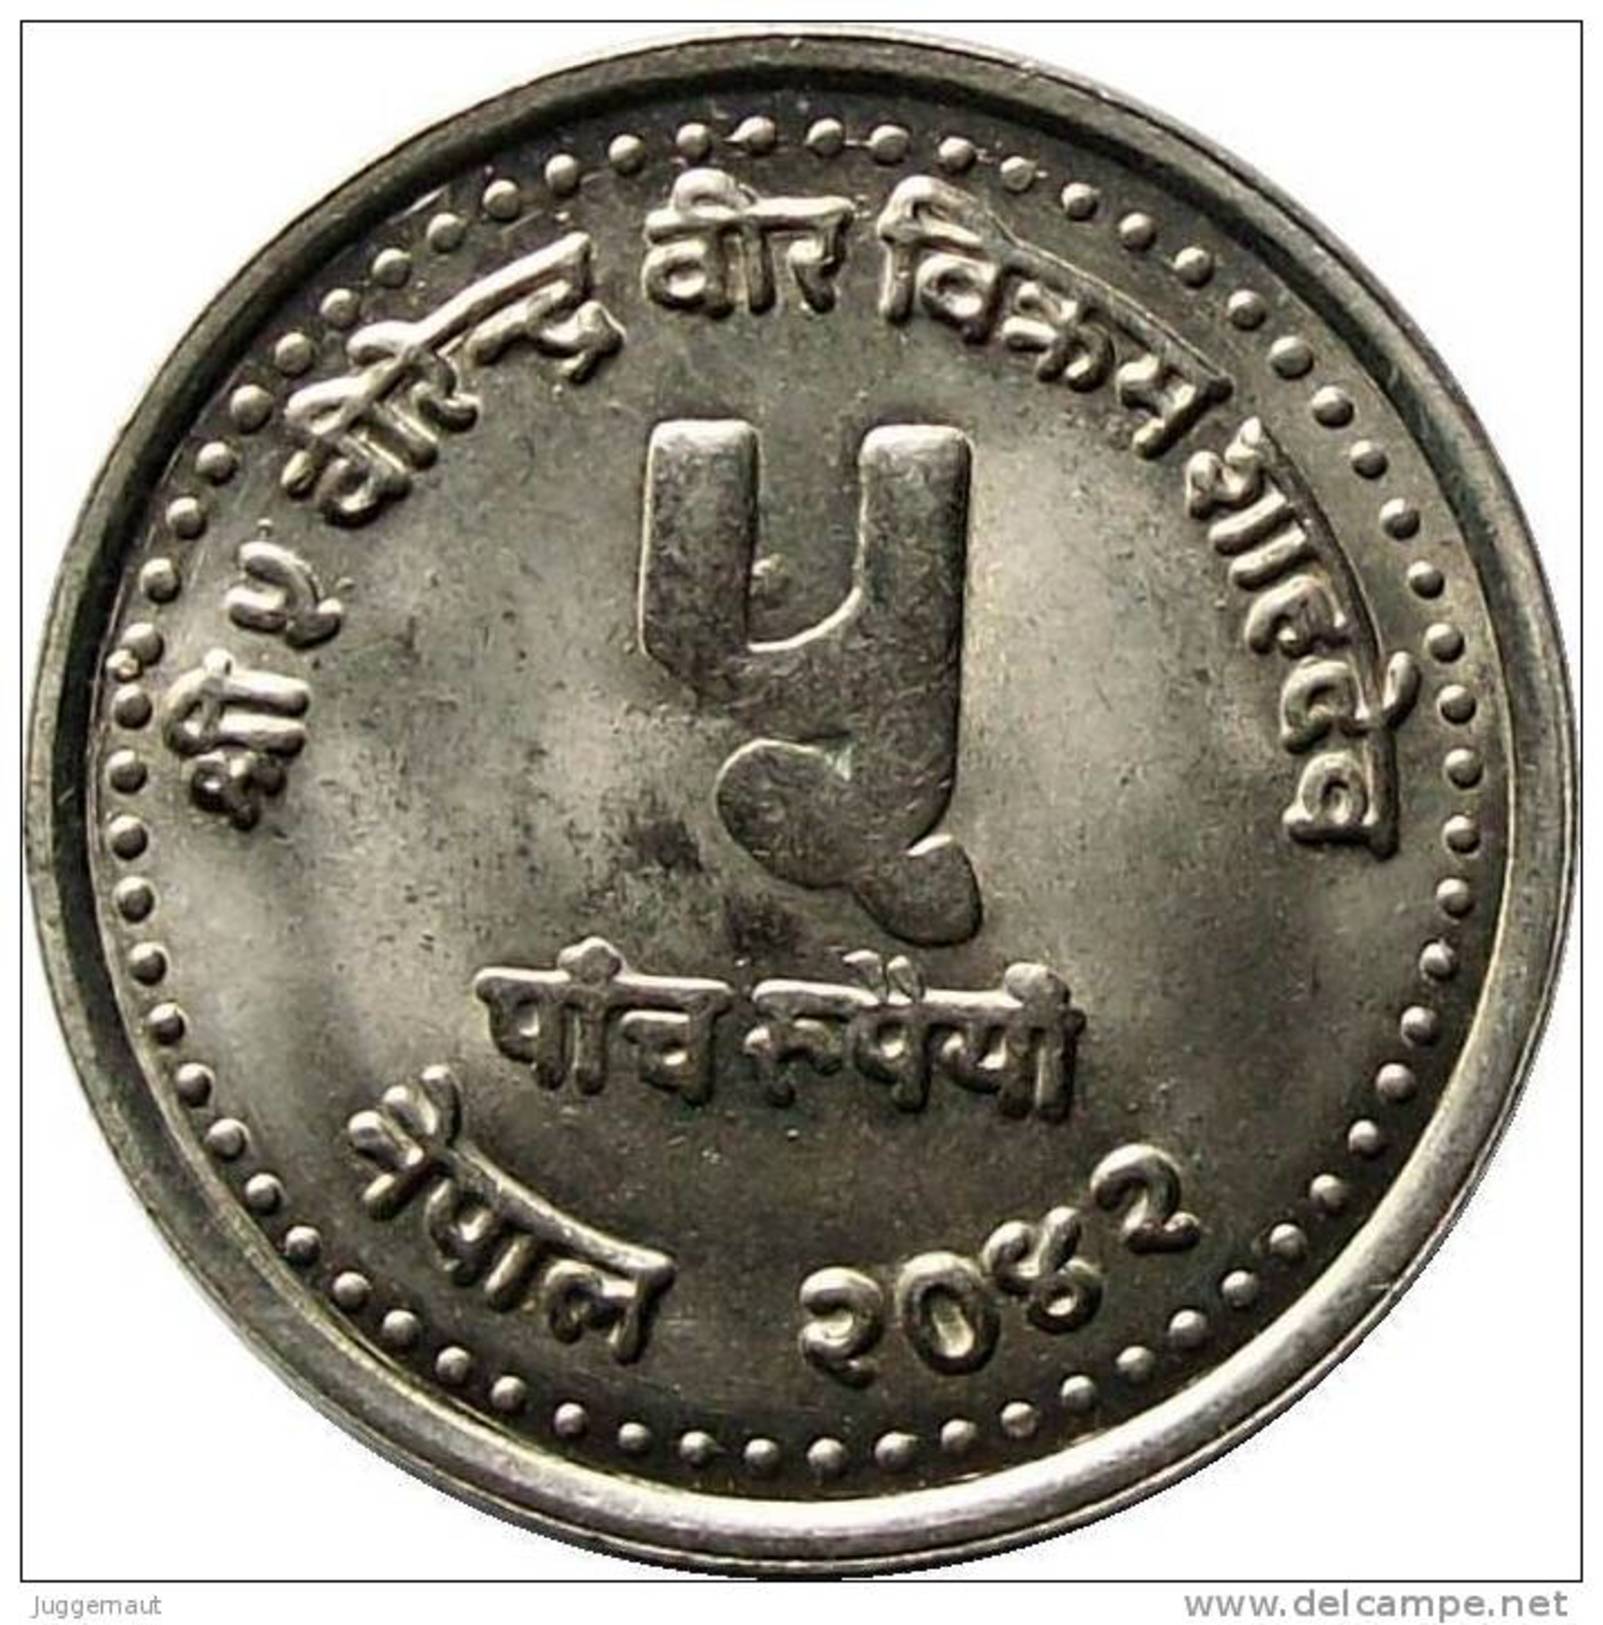 NEPAL SOCIAL SERVICES DAY 1985 COMMEMORATIVE COIN NEPAL 1985 KM-1047 UNCIRCULATED UNC - Nepal